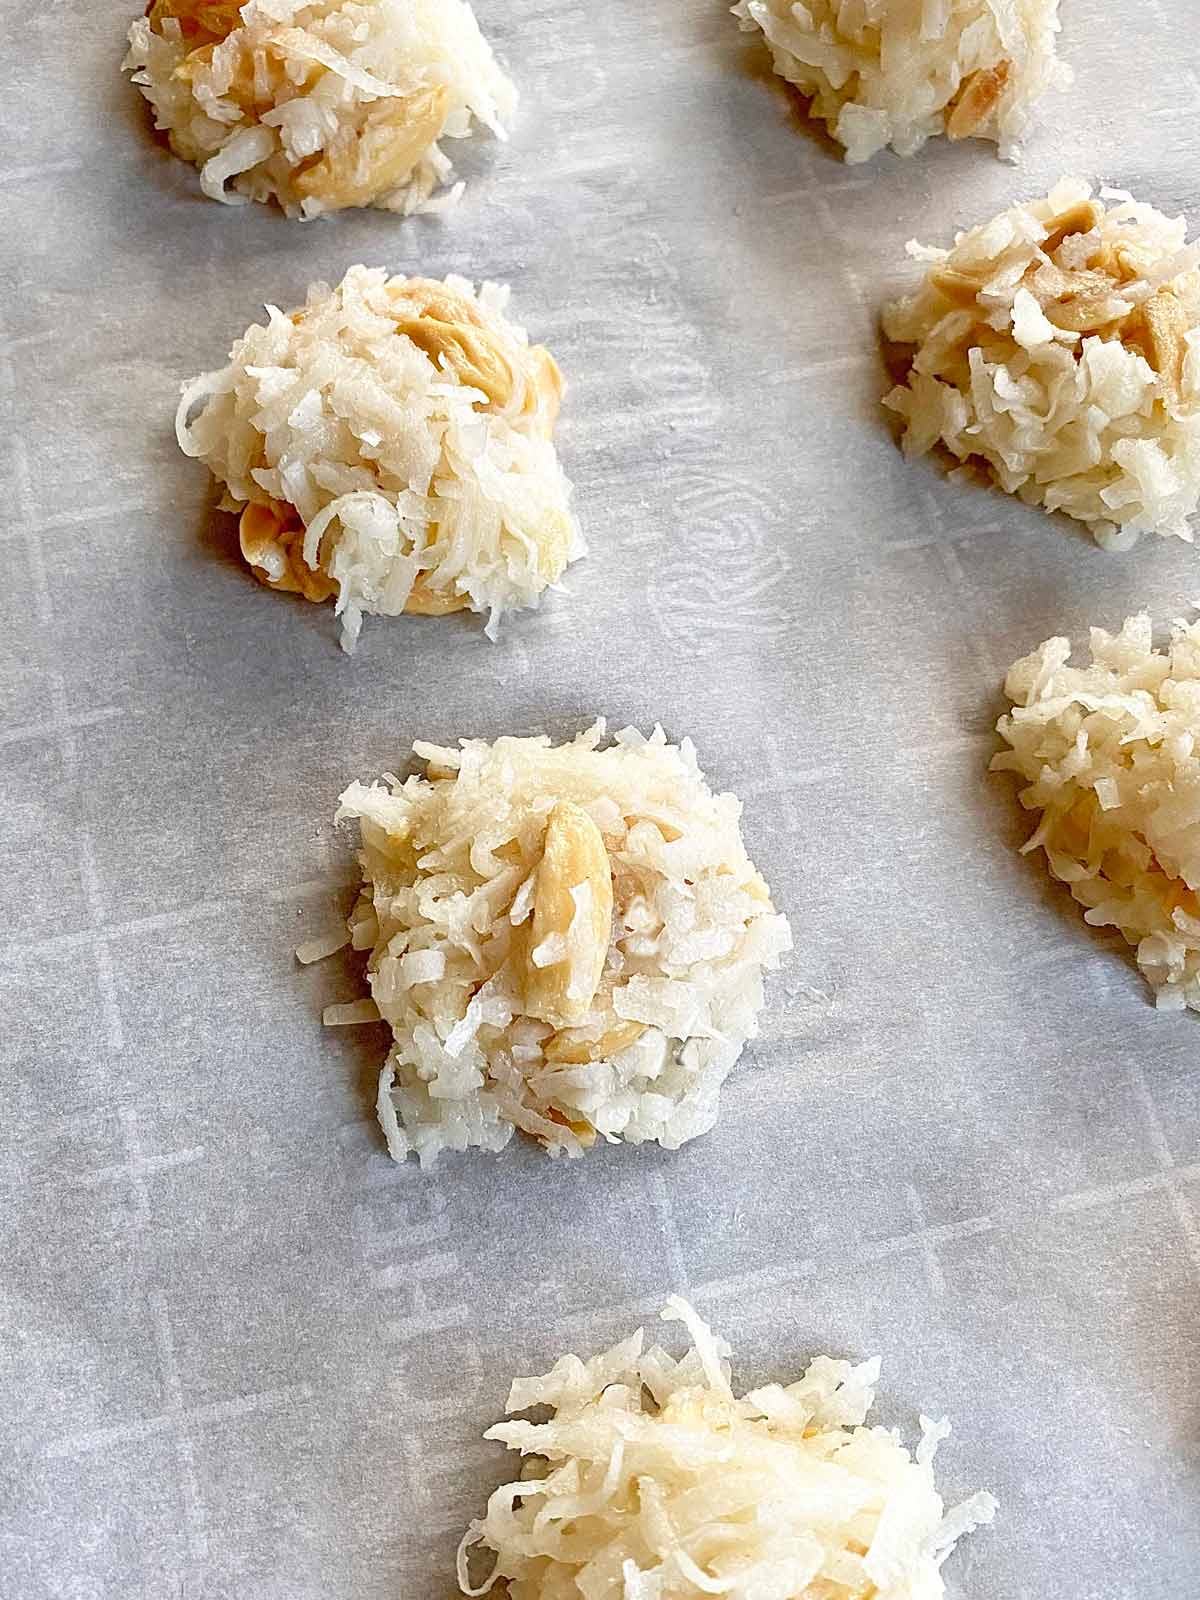 Unbaked balls of coconut macaroon dough on a parchment lined baking sheet.